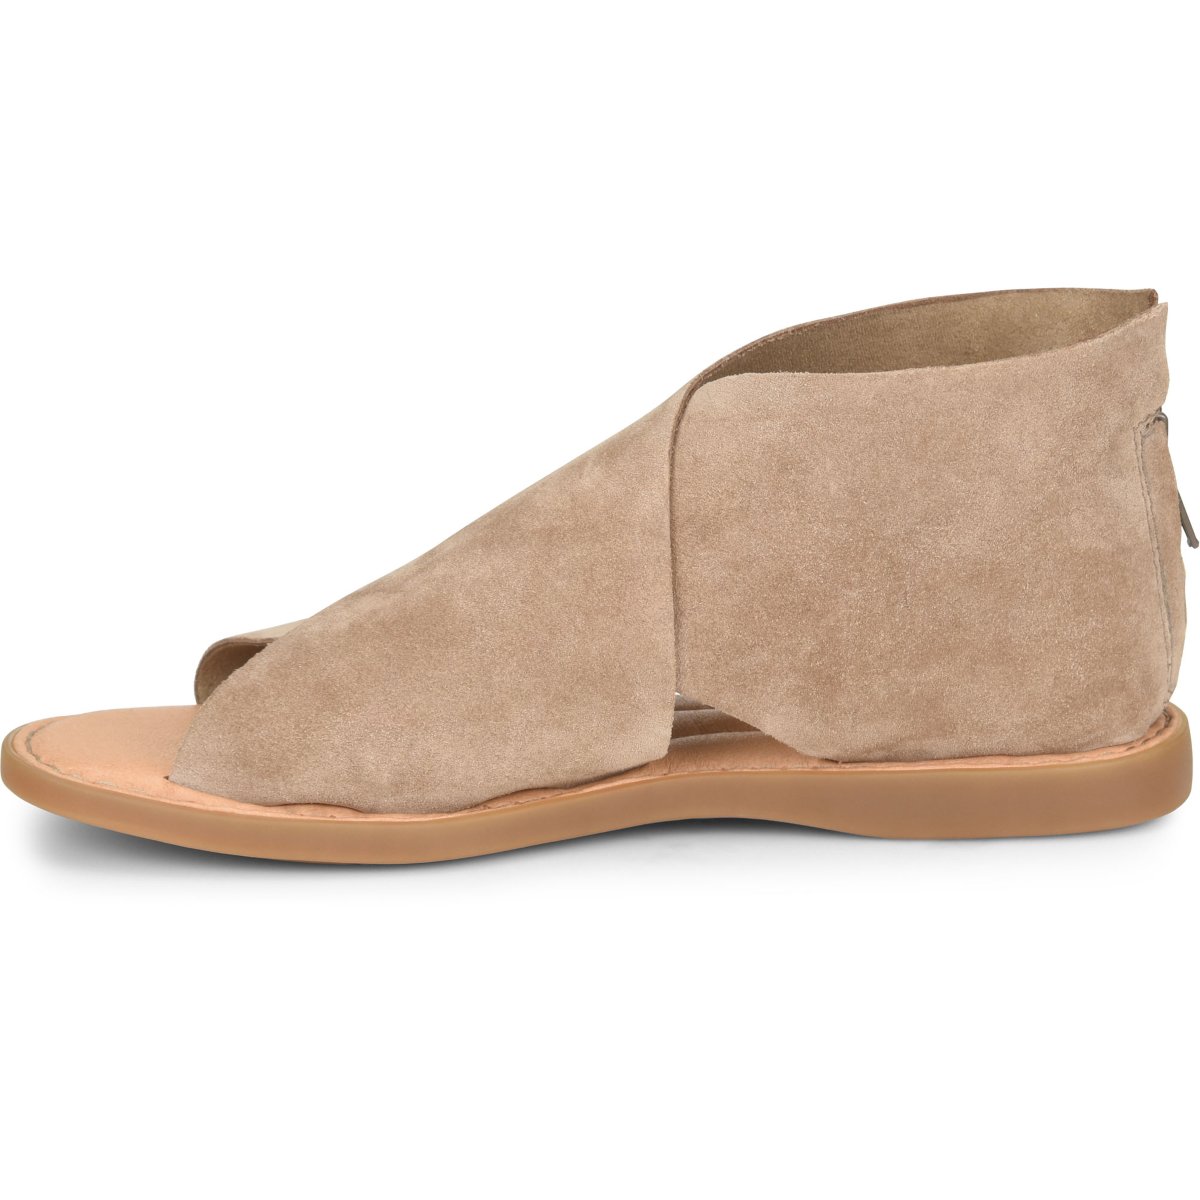 BORN Women's Iwa Sandal Taupe Suede (Beige) - F78017 TAUPE - TAUPE, 11